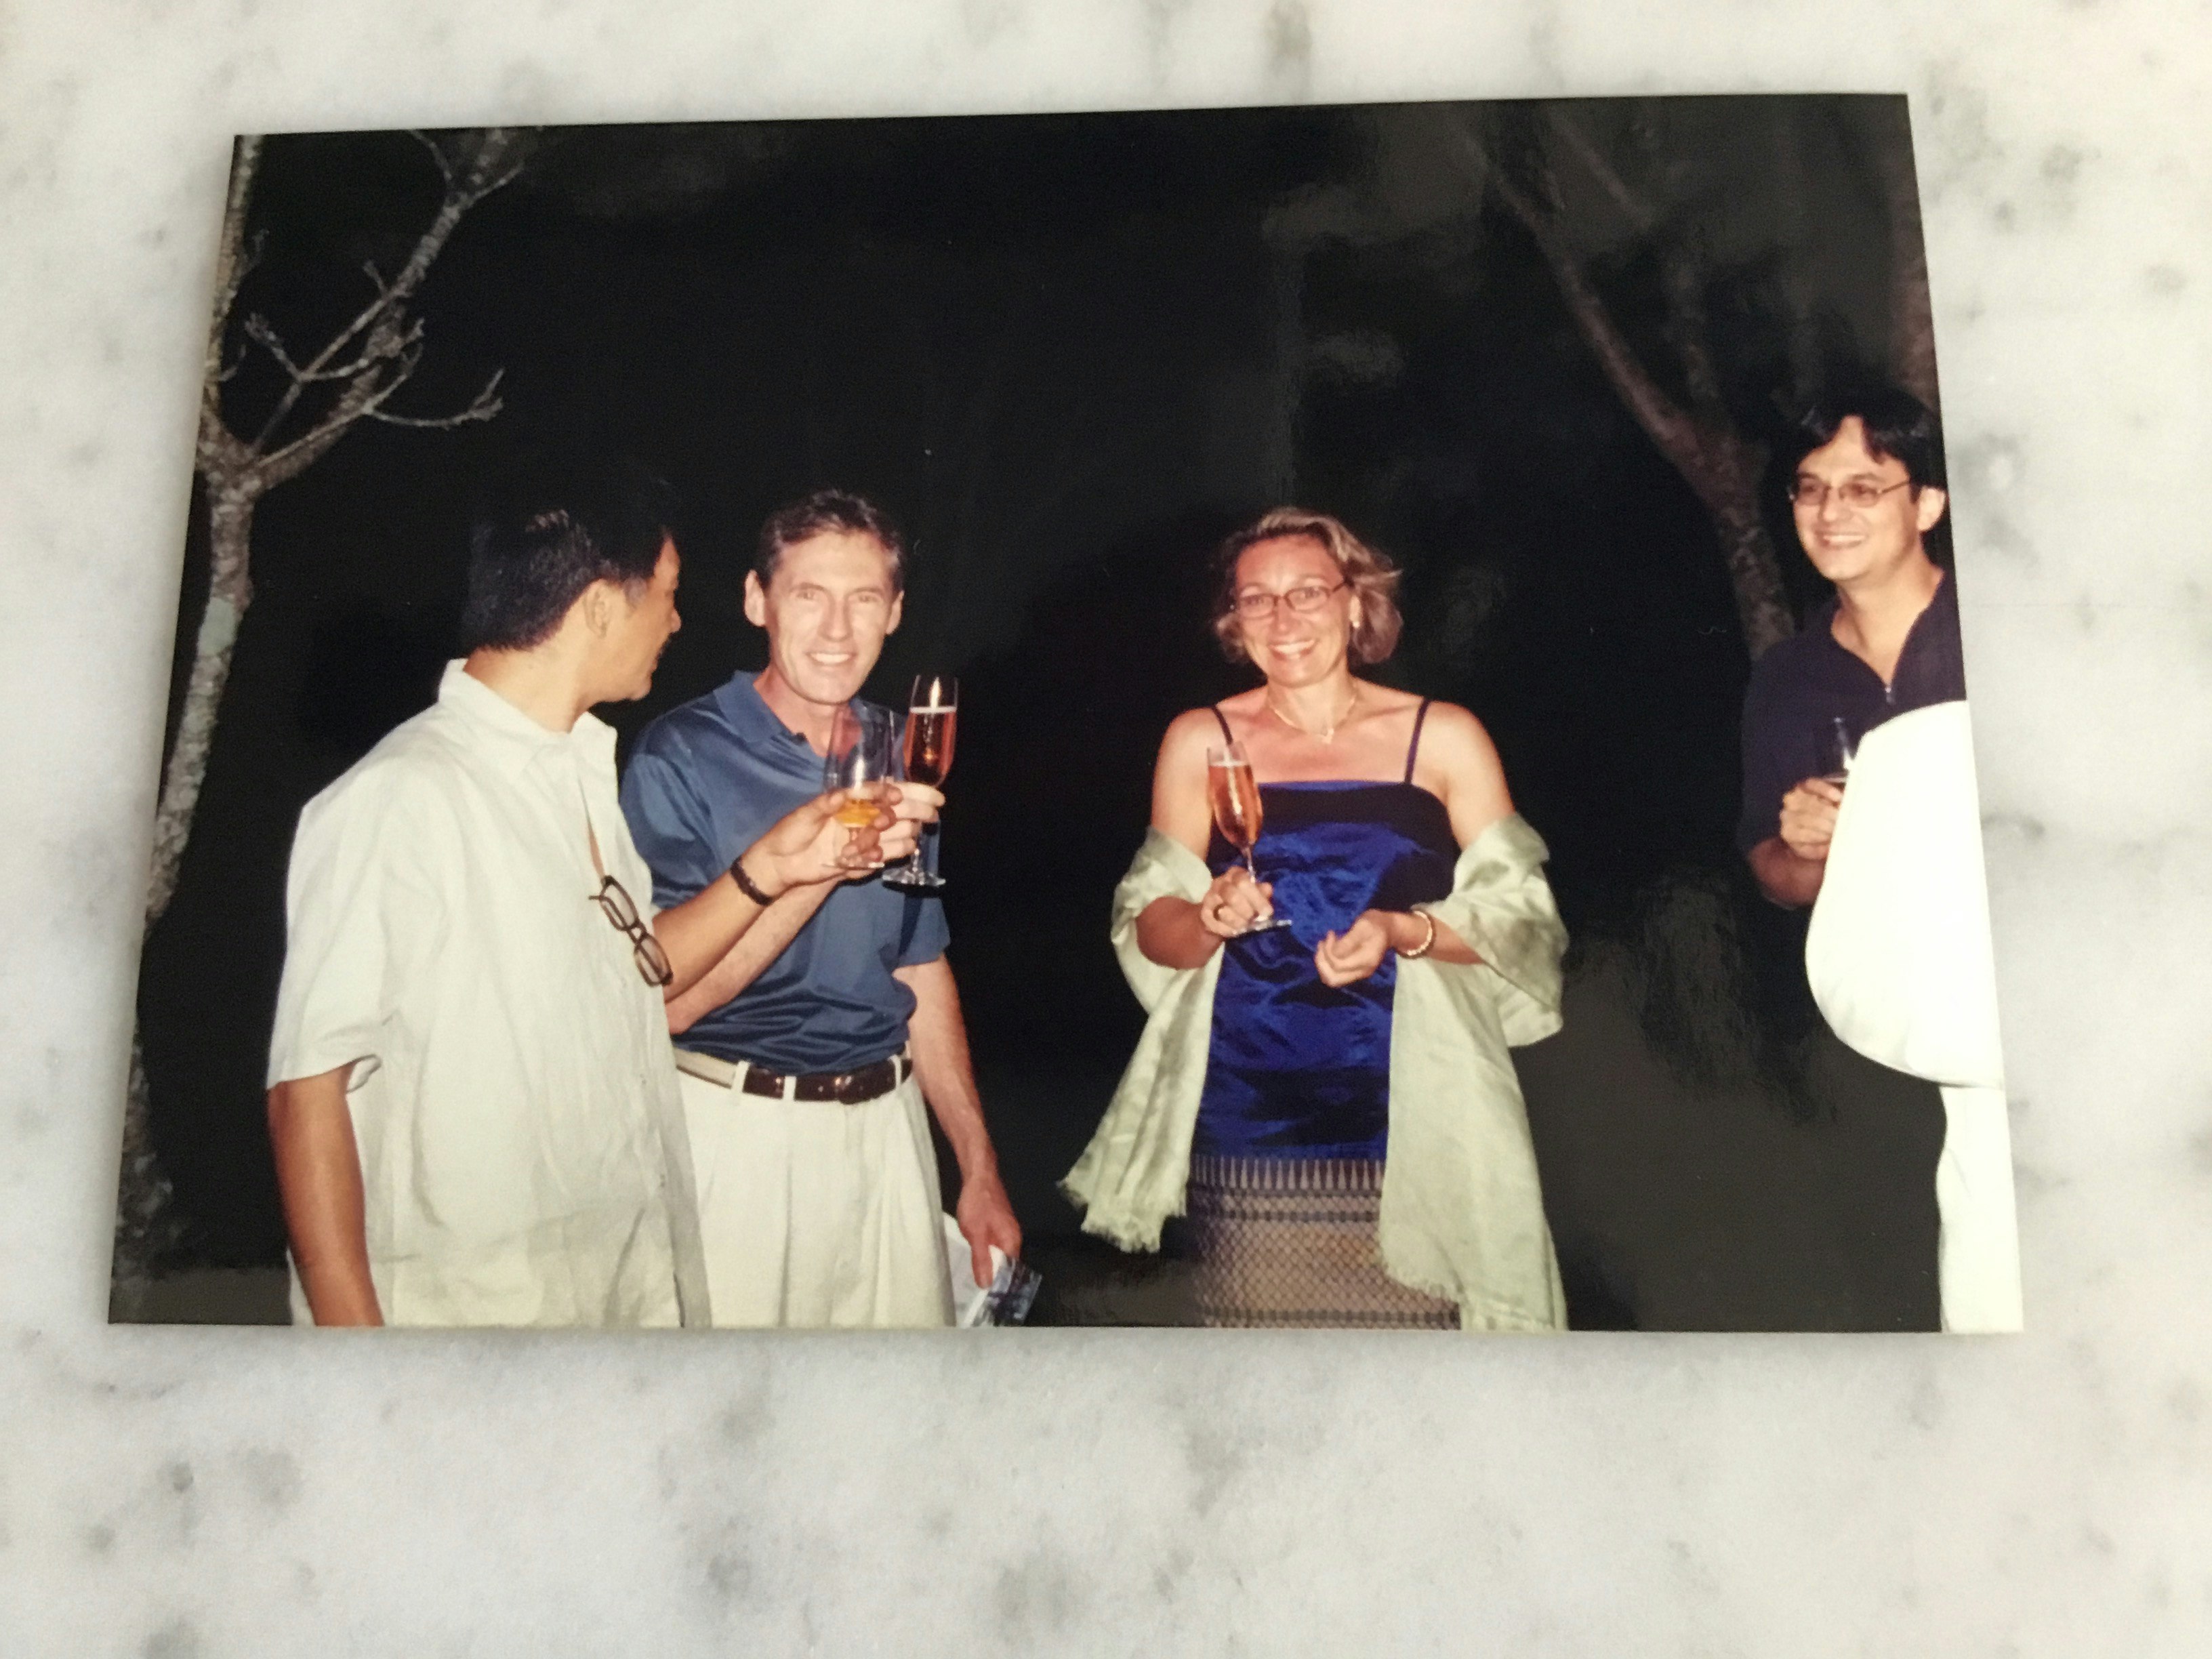 Print photo of four people holding champagne glasses outside at night